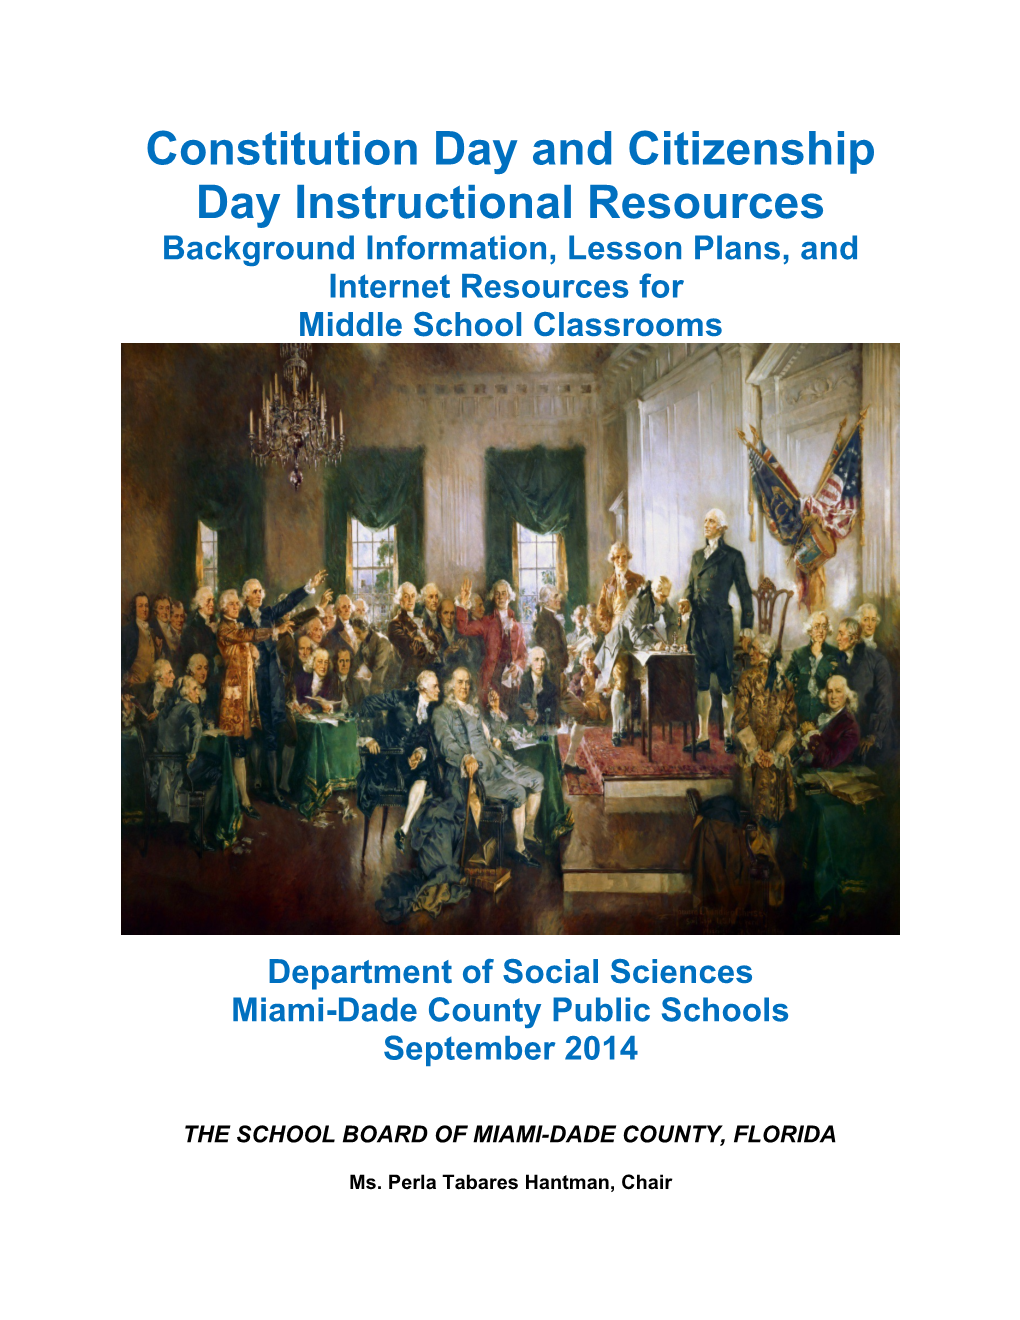 Constitution Day and Citizenship Day Instructional Resources